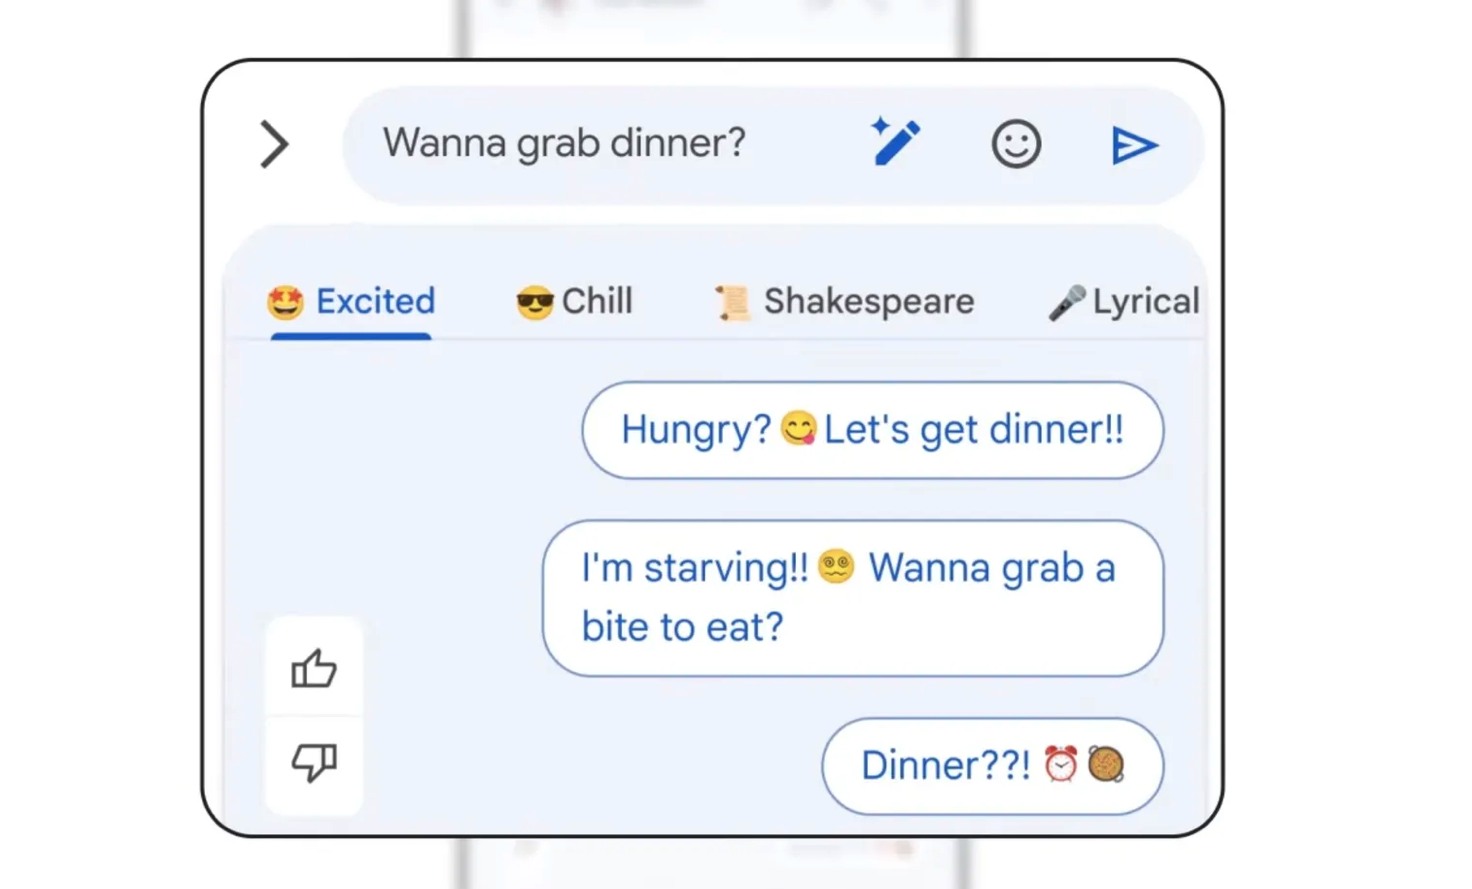 Google rolls out AI-generated messages, critical for privacy